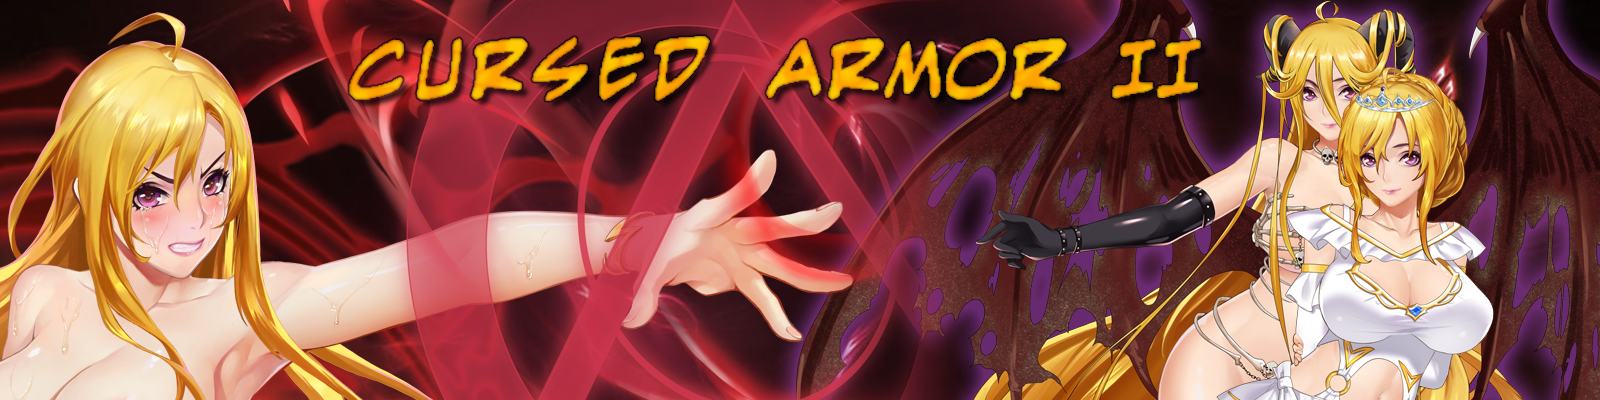 Cursed Armor II [Wolfzq] Adult xxx Game Download